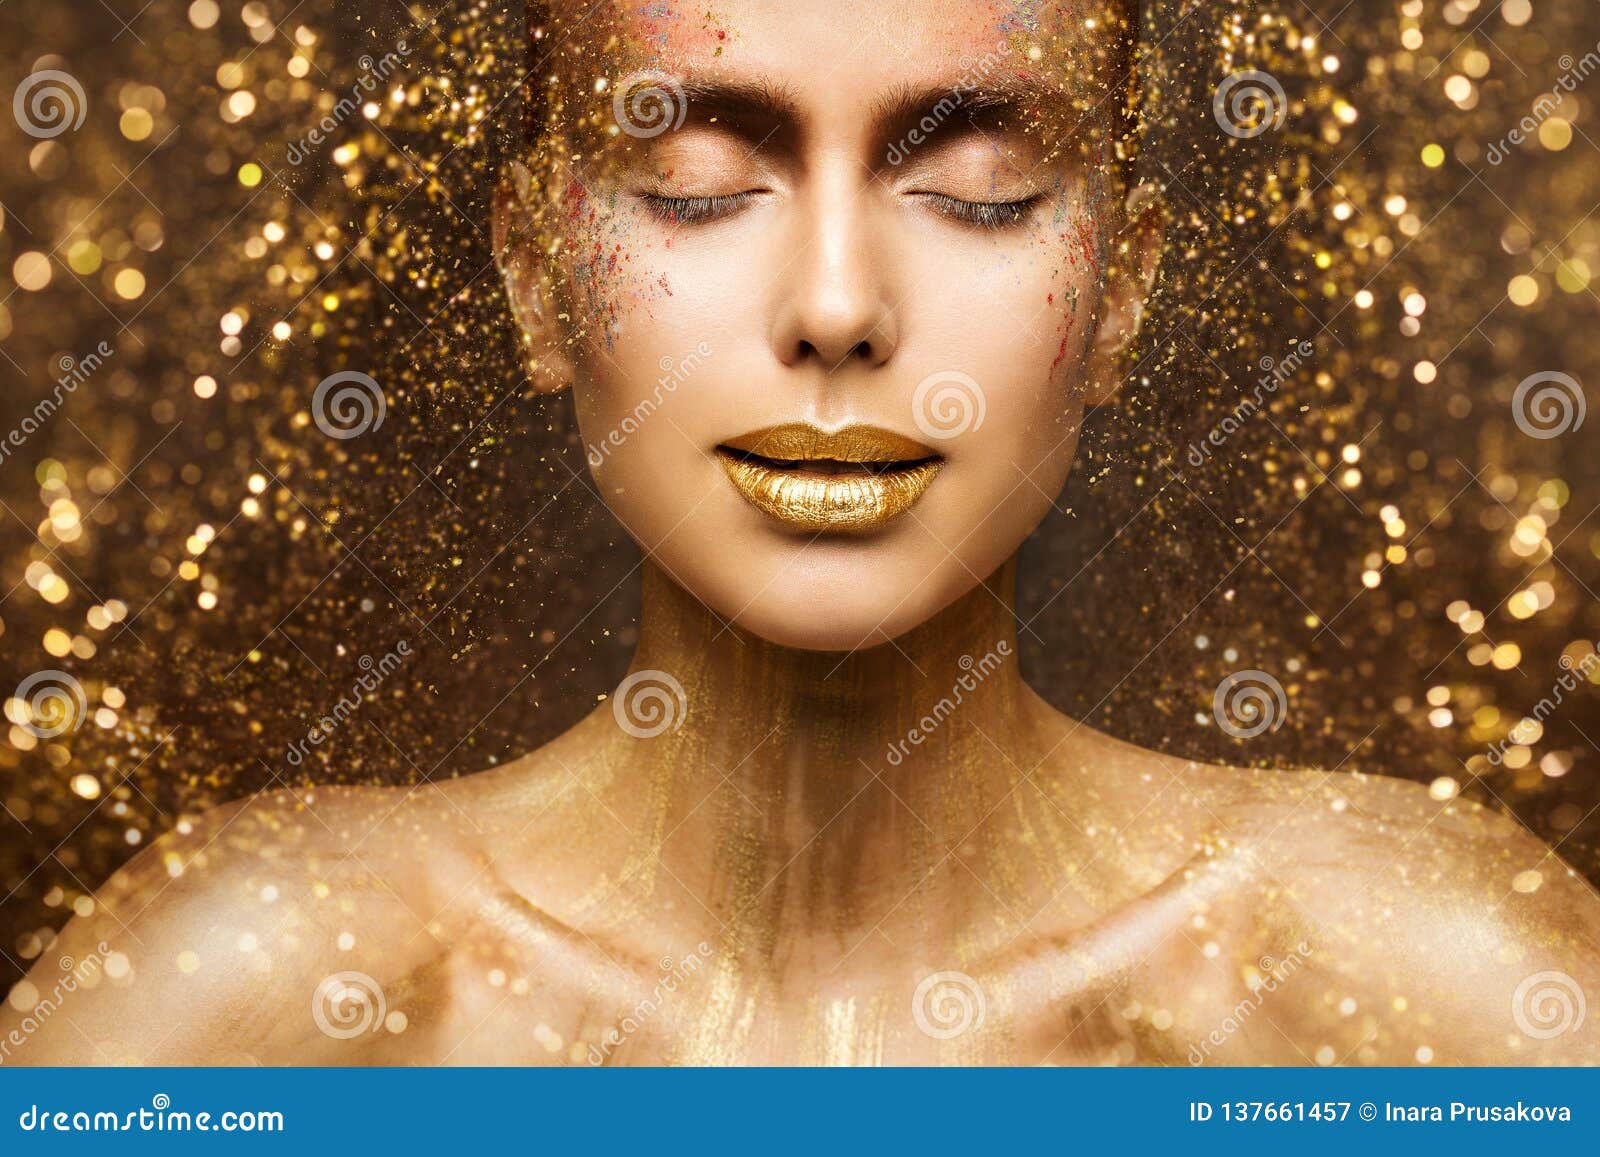 Brunette Woman In Gold Body Paint, Profile View Image & Design ID